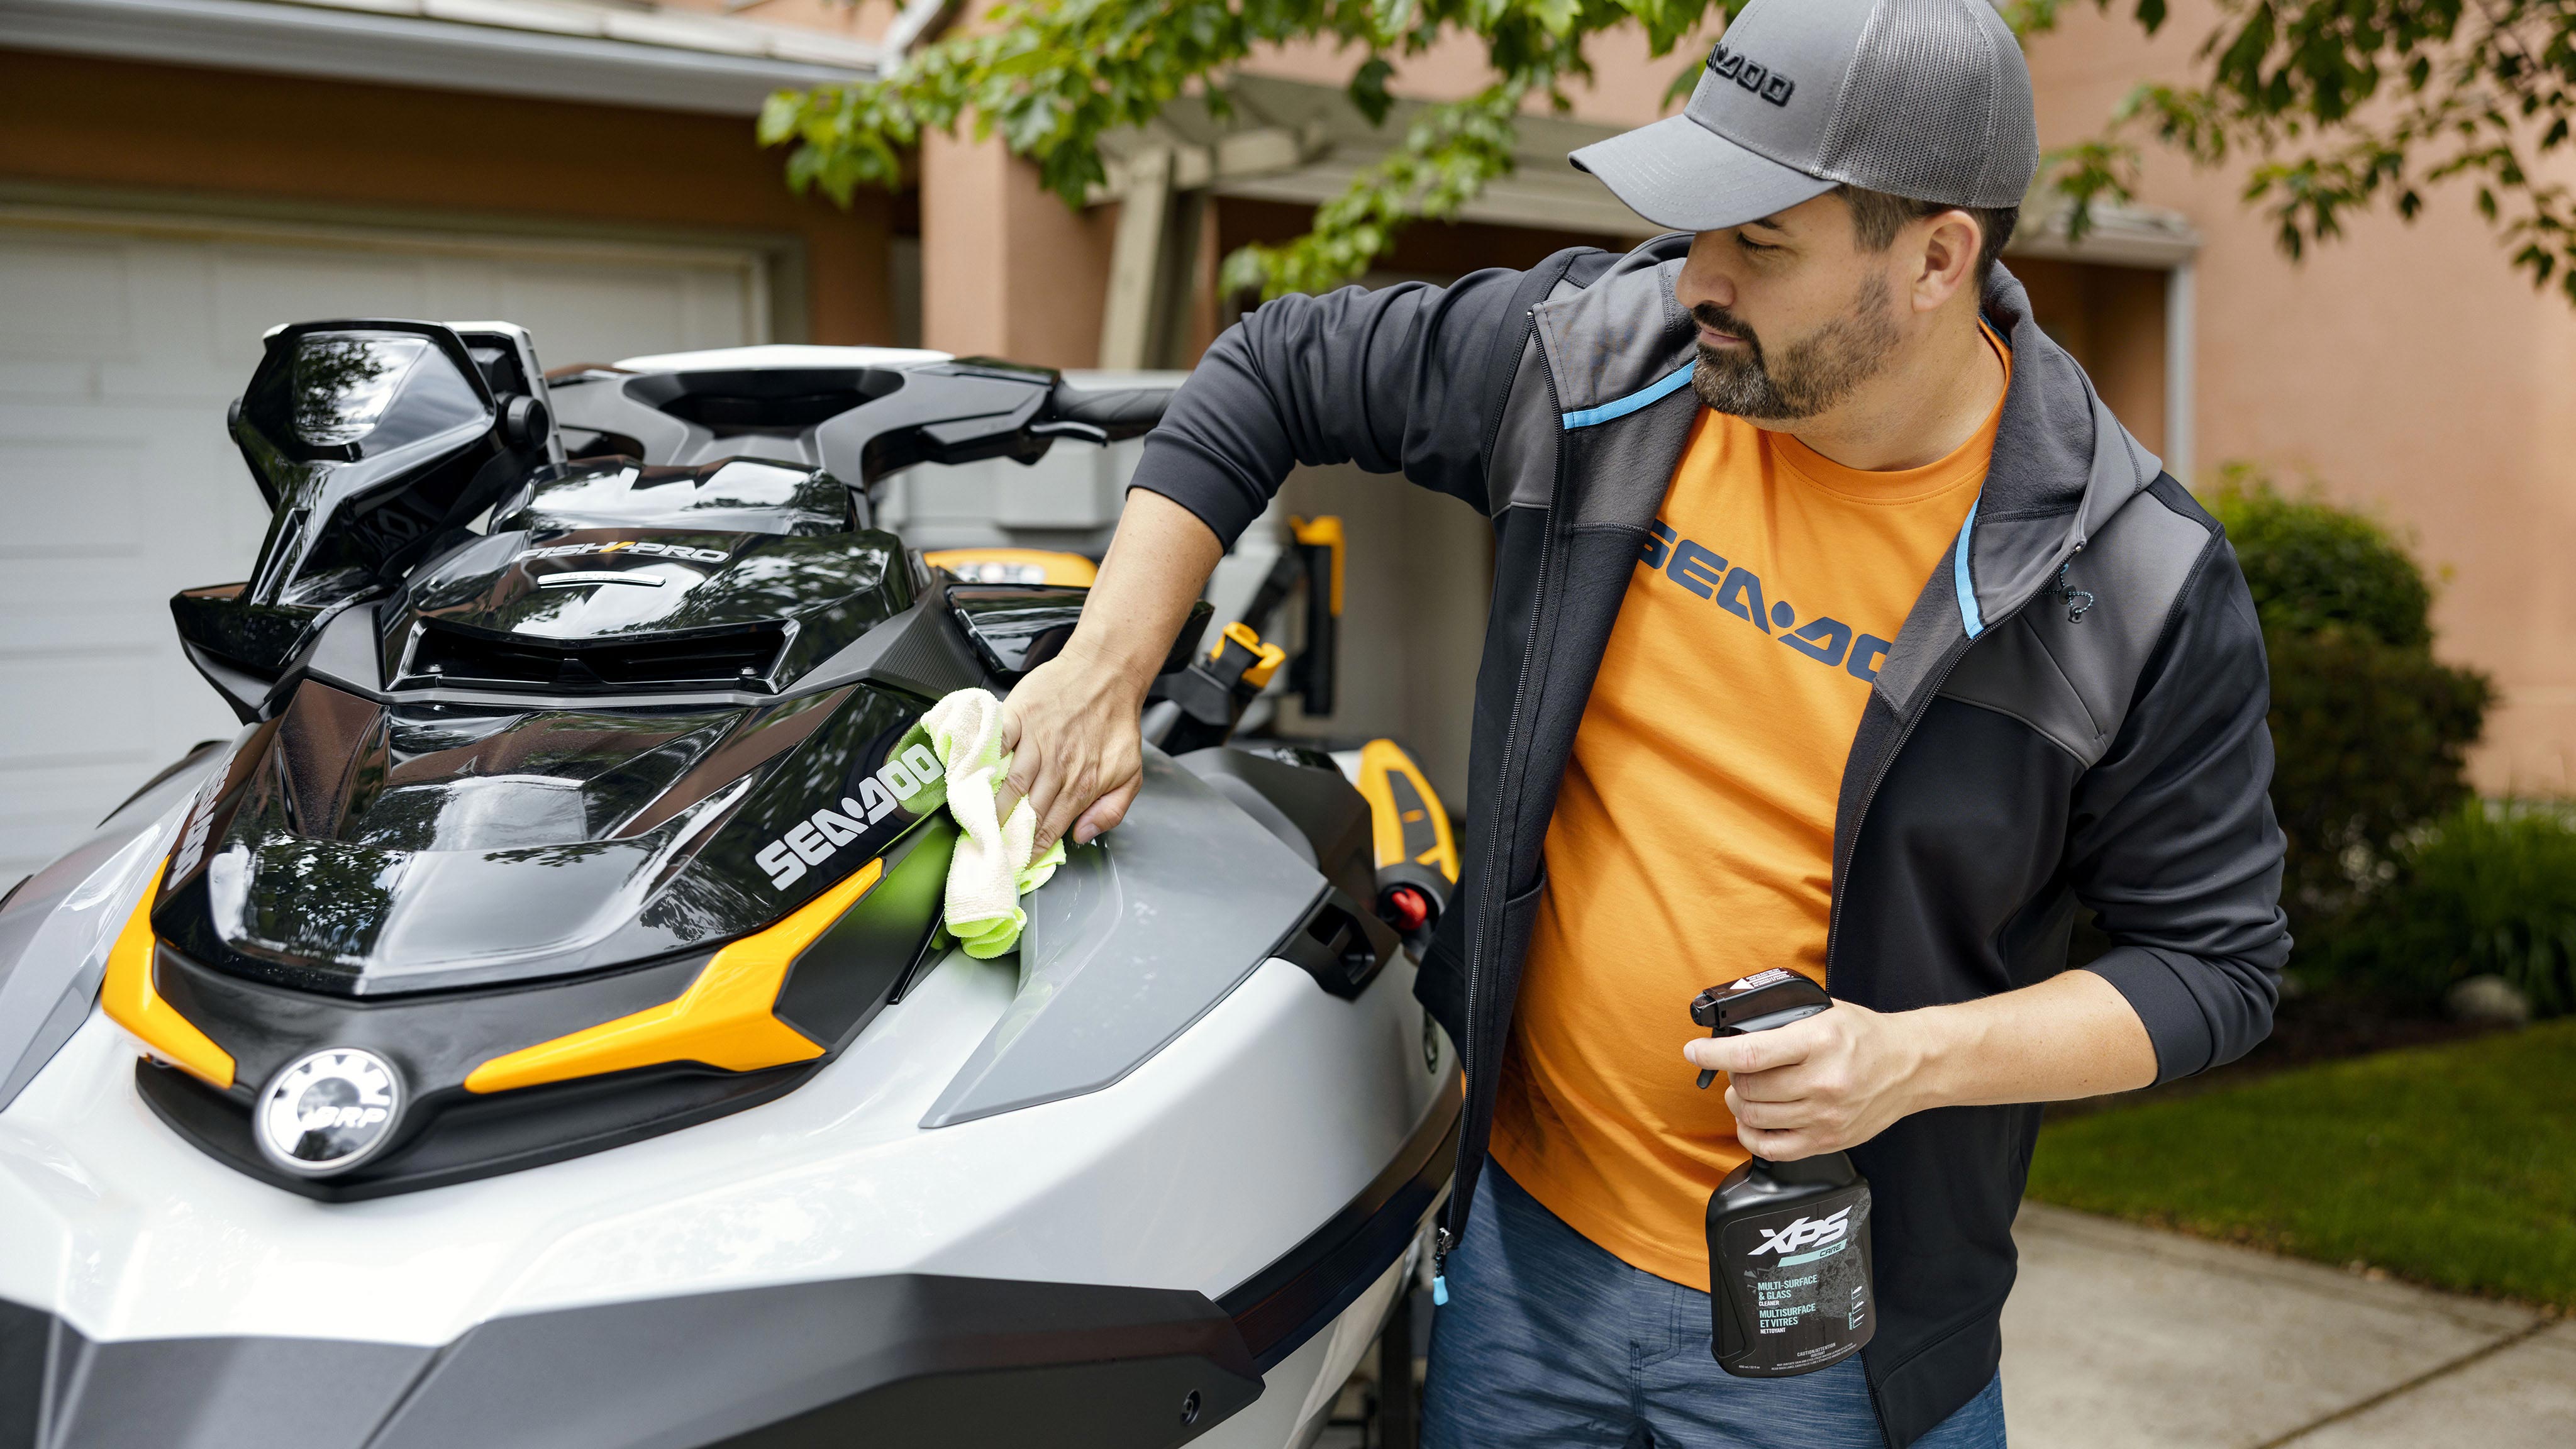 Man washing his Sea-Doo watercraft with XPS care products